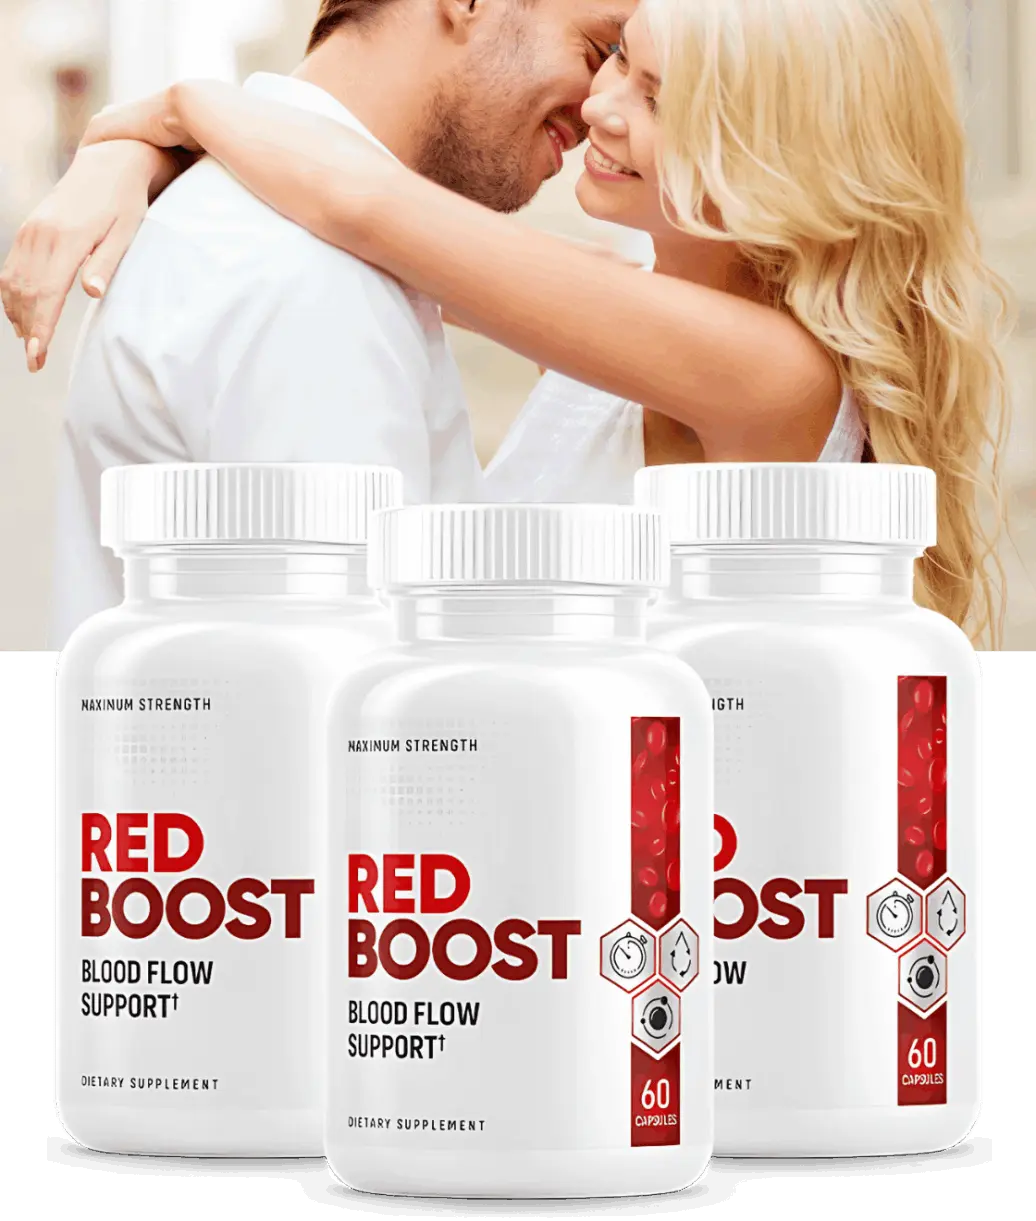 Red Boost official website